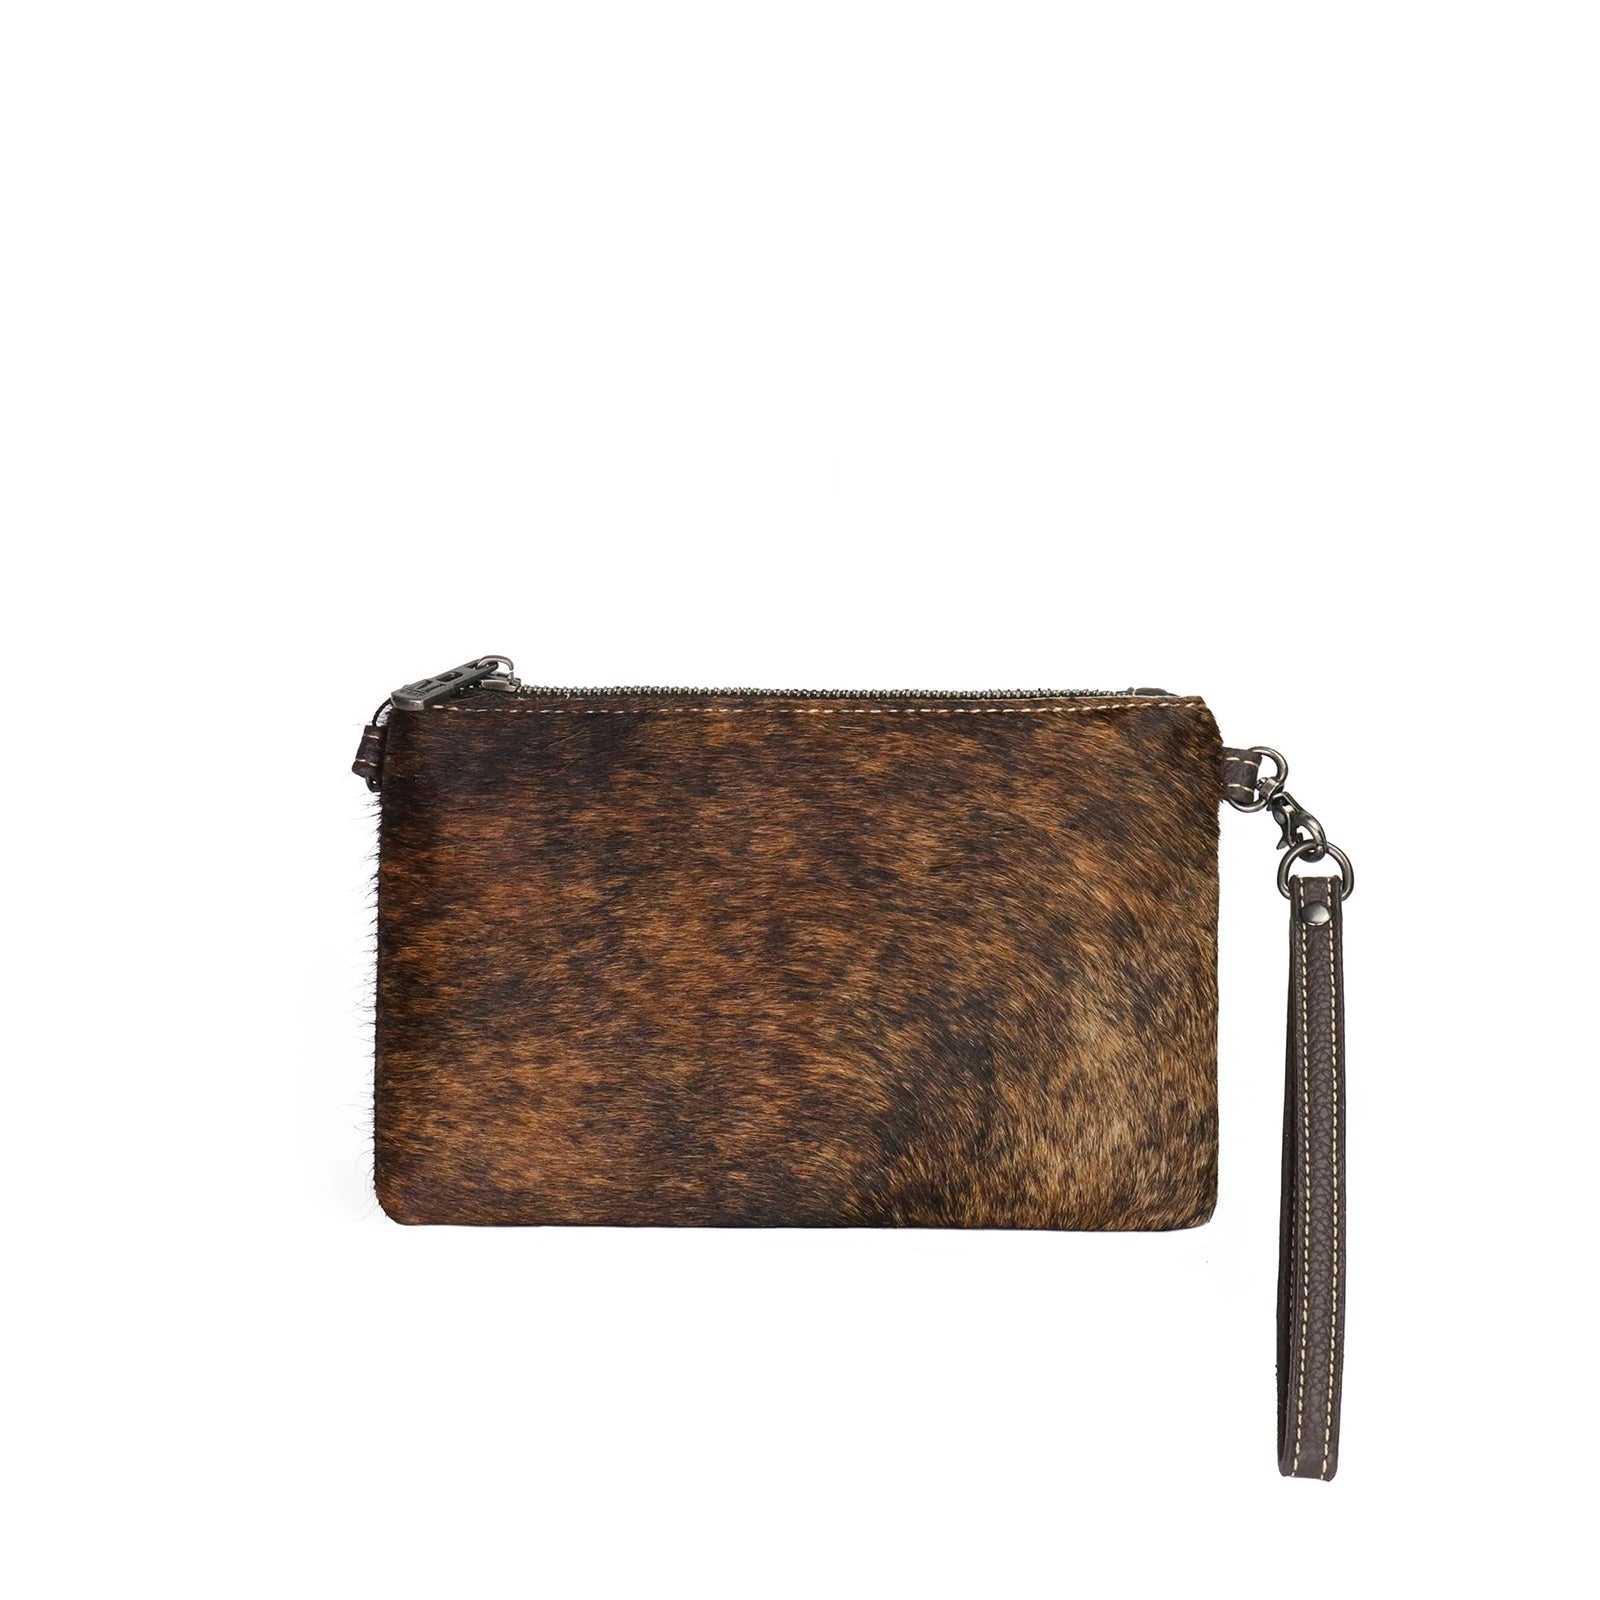 Montana West Hair-On Cowhide Leather Crossbody Clutch